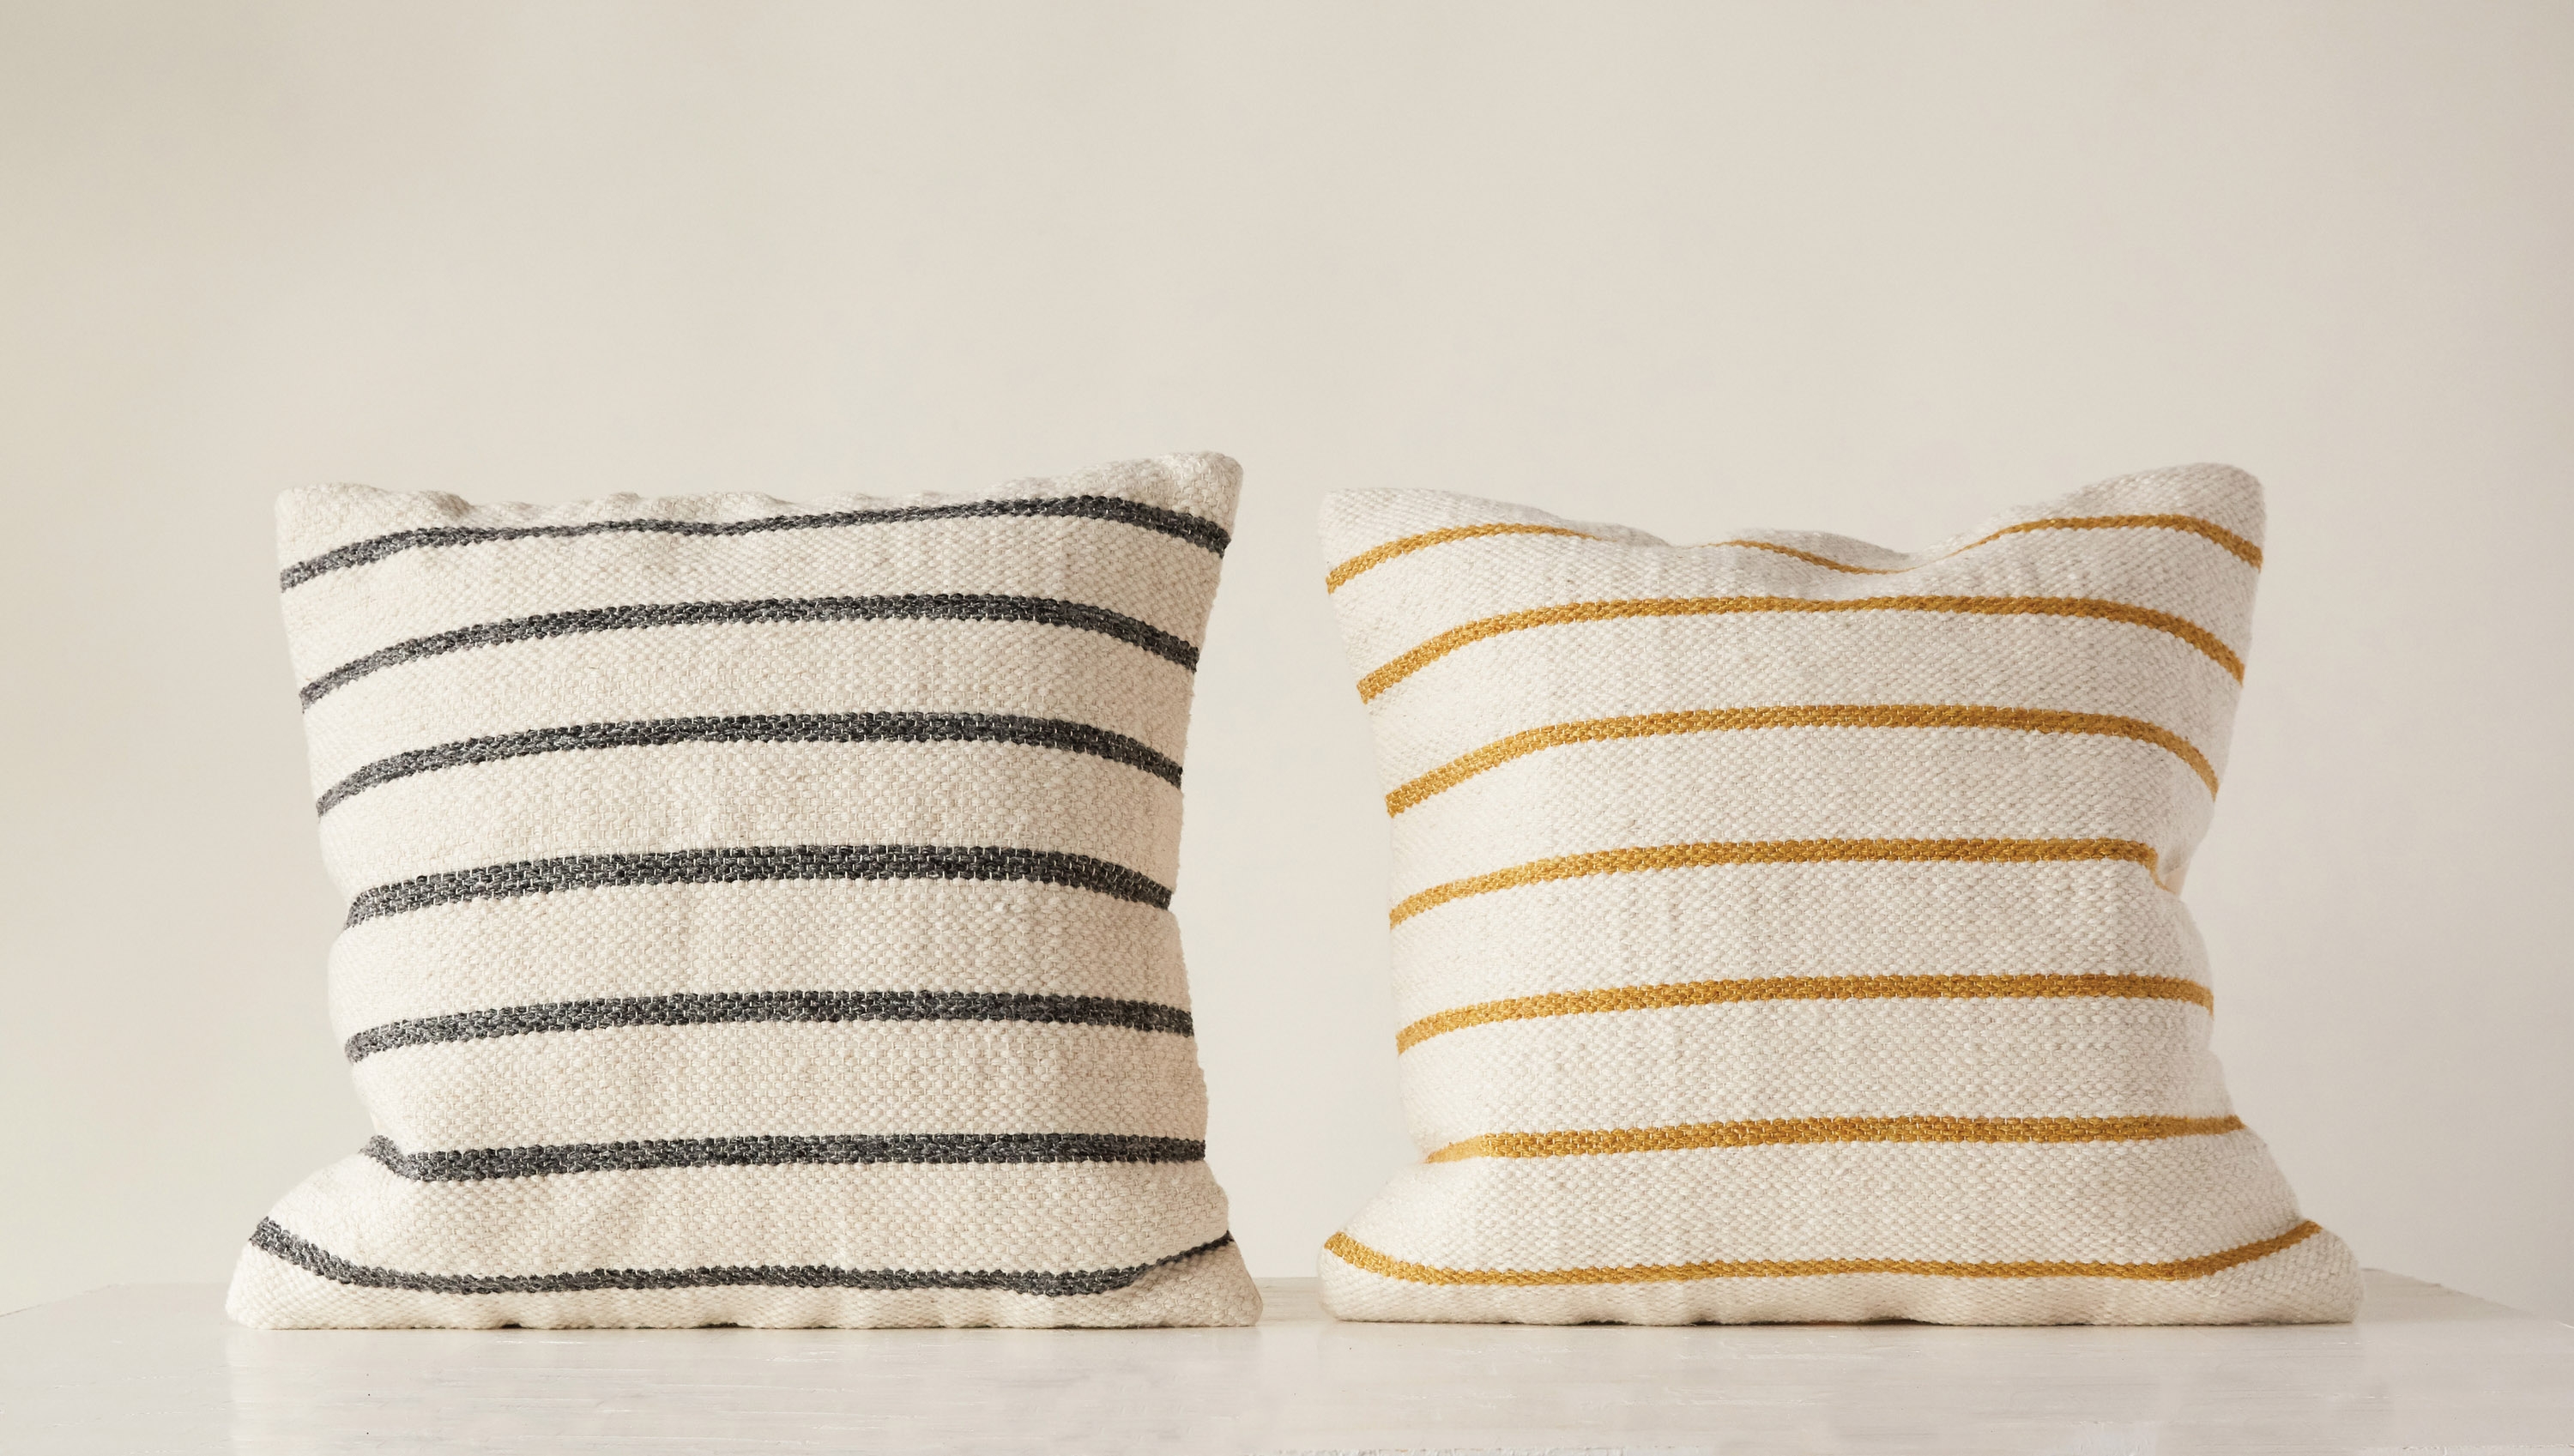 Woven Grey & Gold Striped Square Wool Blend Pillows (Set of 2 colors) - Image 0